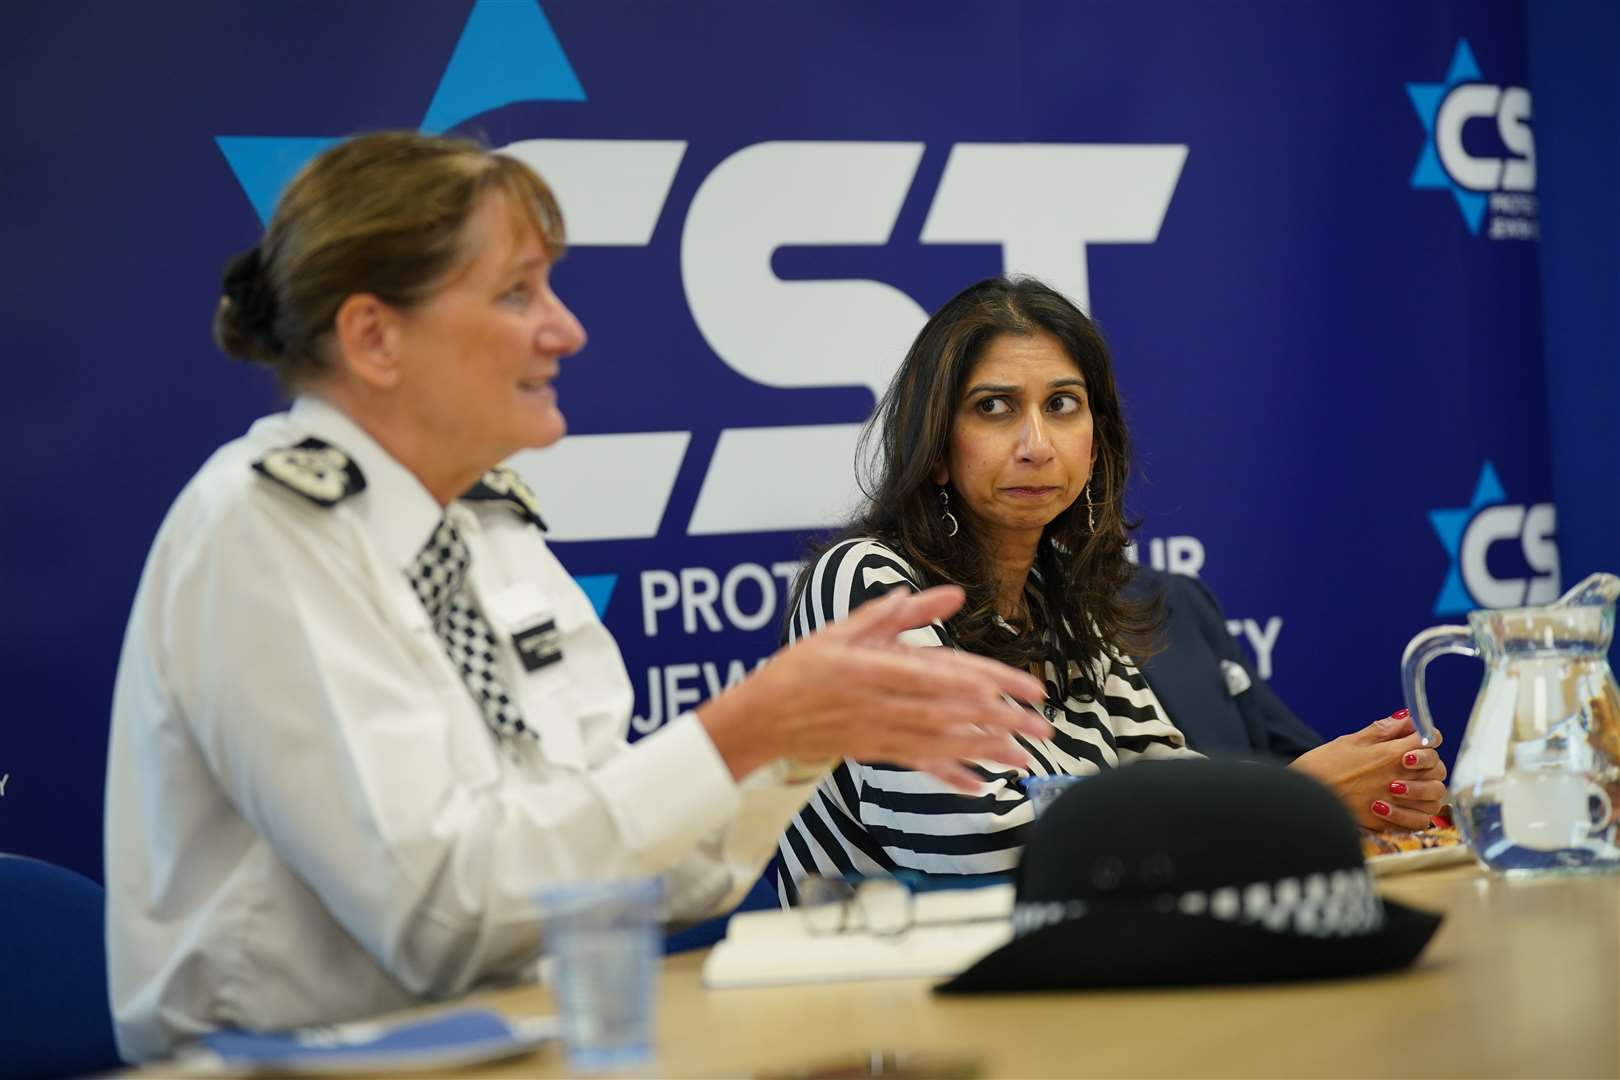 Home Secretary Suella Braverman and Dame Lynne Owens, Deputy Commissioner of the Met Police, during a visit to the Community Security Trust (Yui Mok/PA)